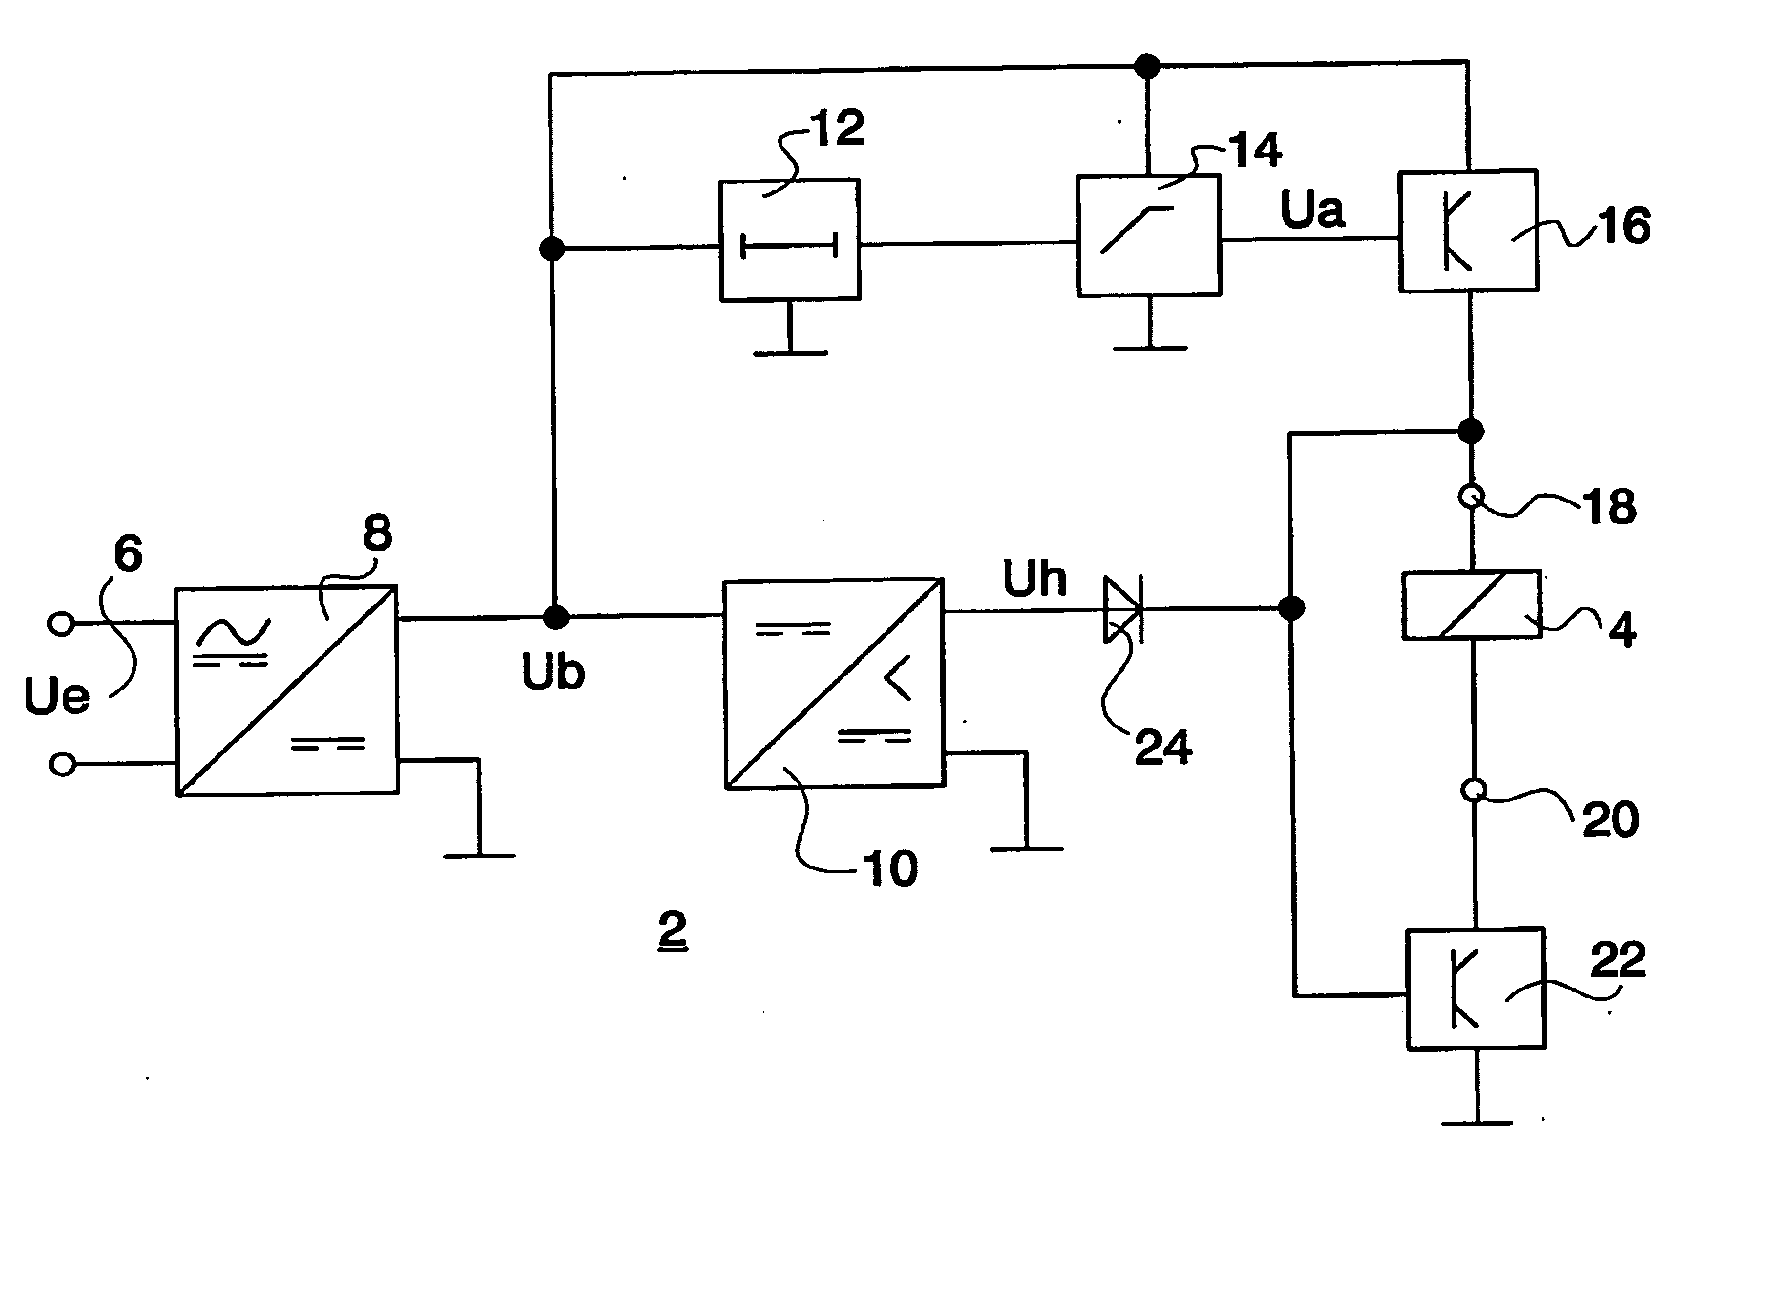 Control circuit for an electromagnetic drive